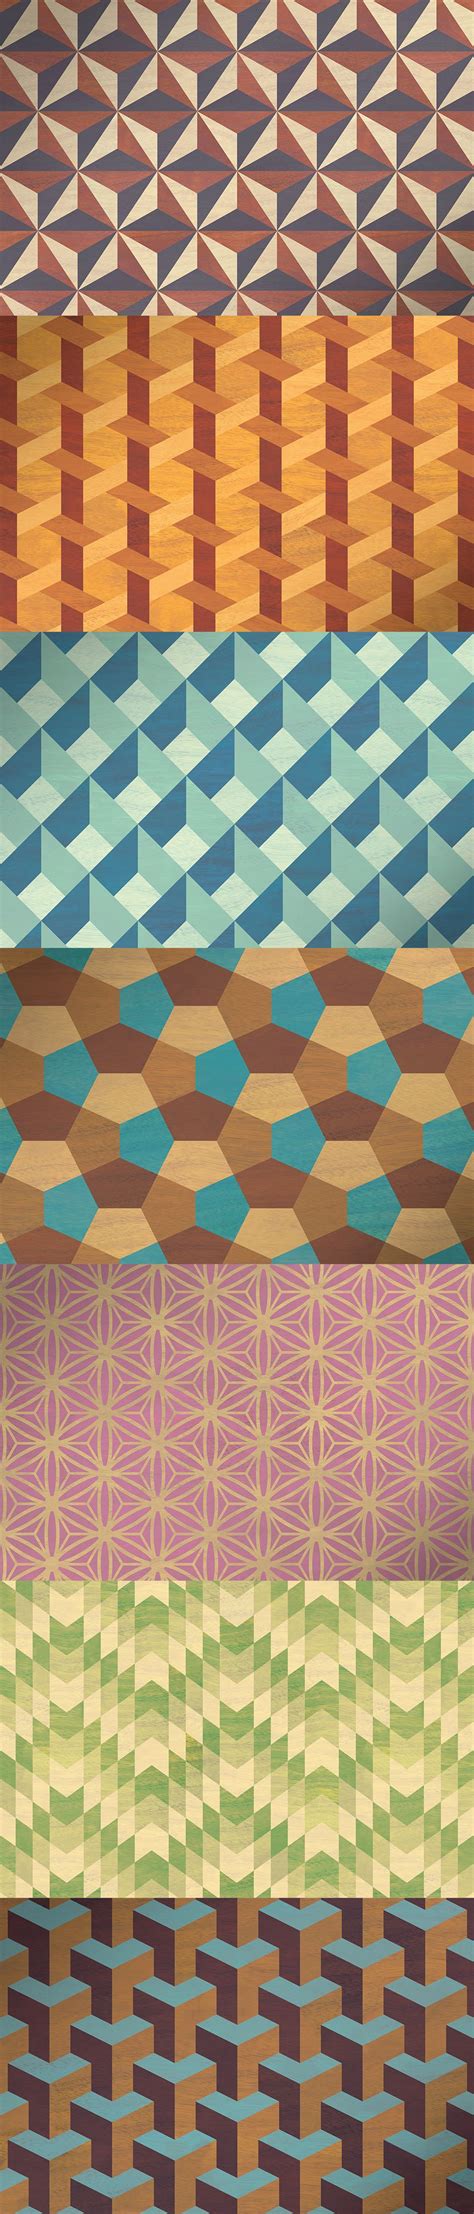 Geometric Marquetry Patterns 10 Retro Seamless Patterns Marquetry